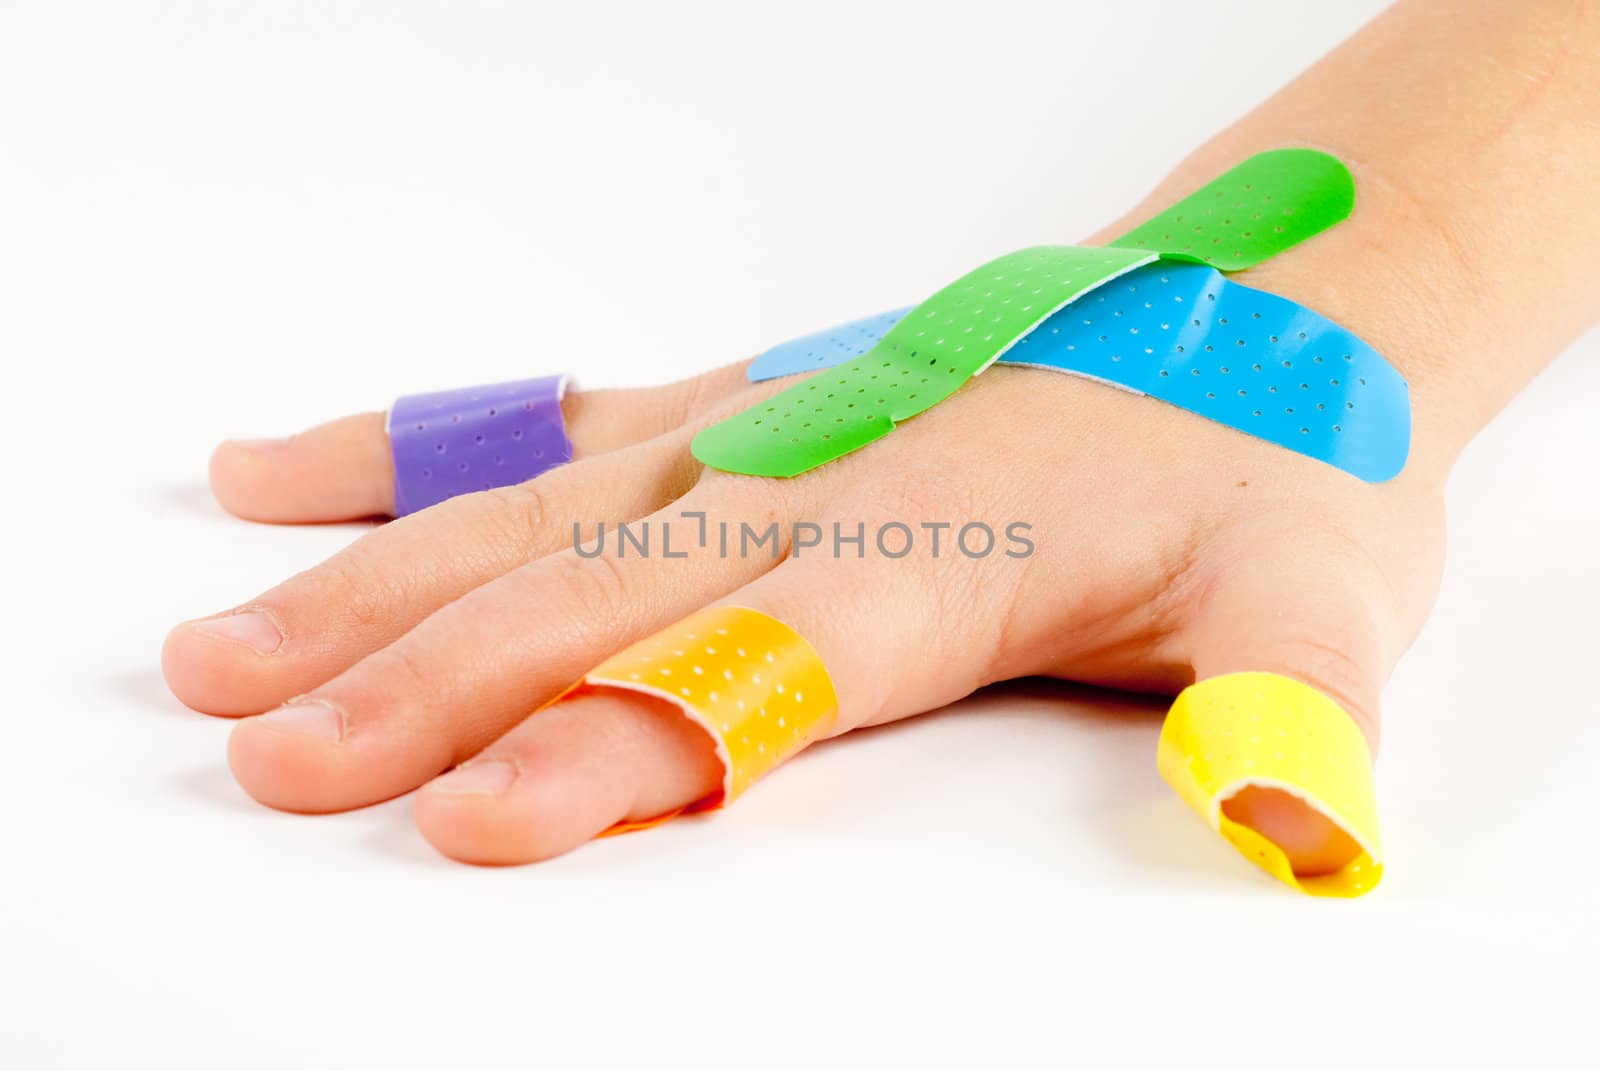 Colorful bandages on child's hand.